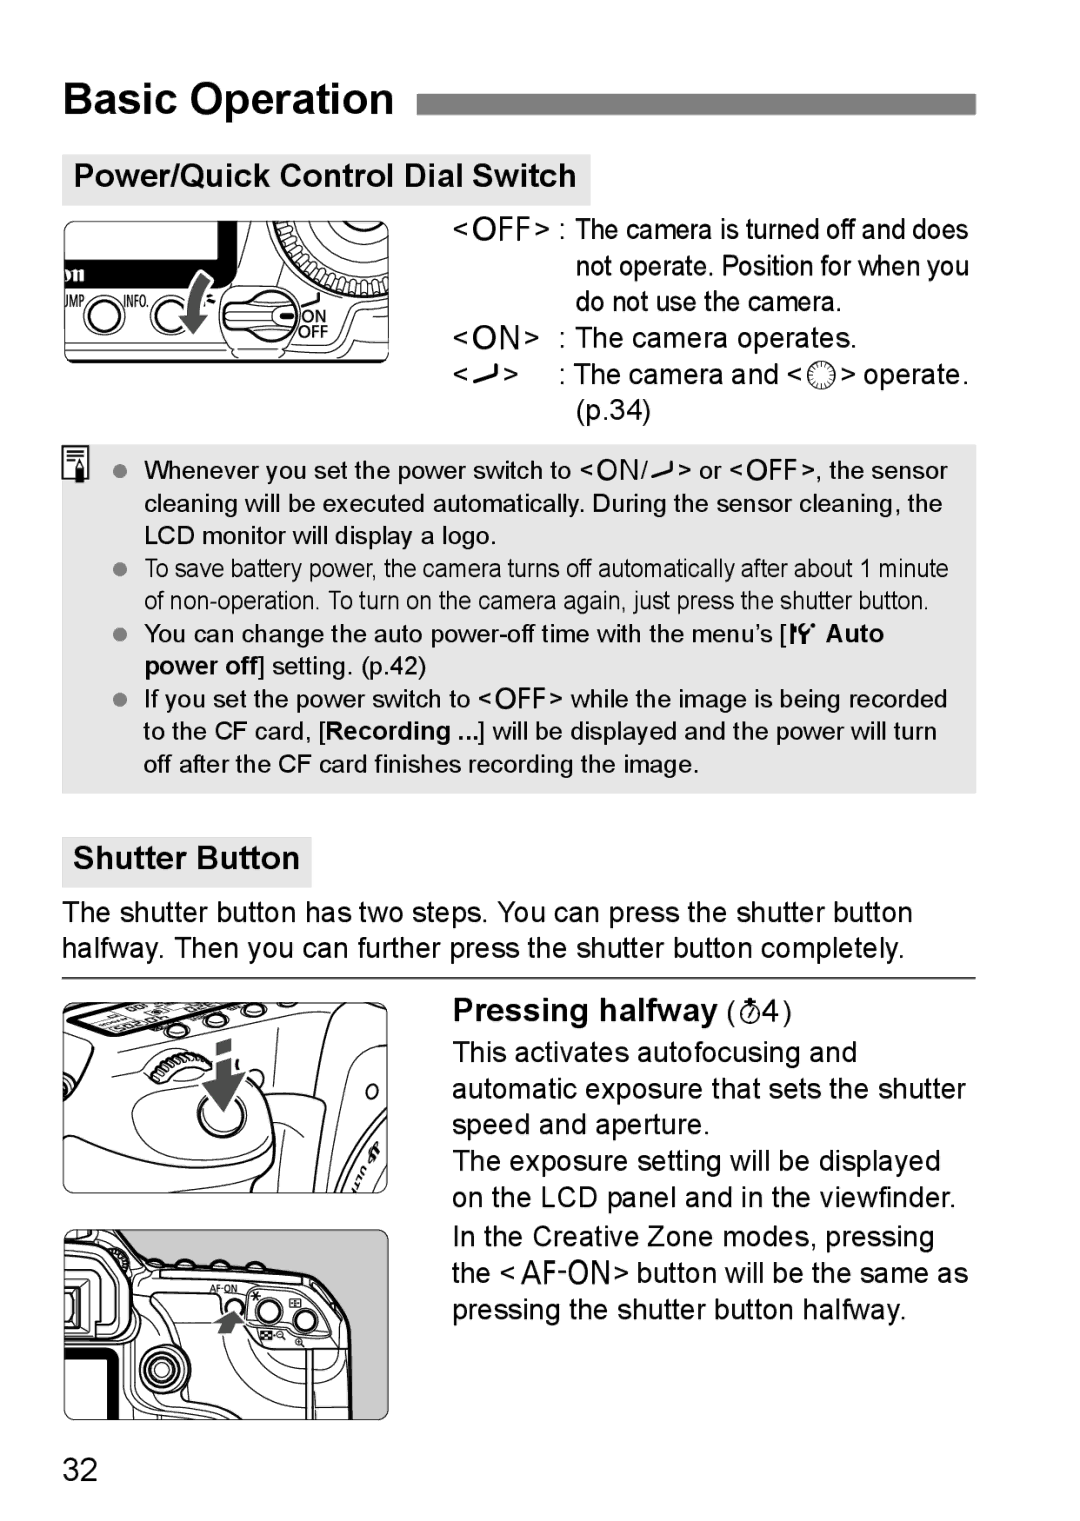 Canon EOS40D instruction manual Basic Operation, Power/Quick Control Dial Switch, Shutter Button, Pressing halfway 